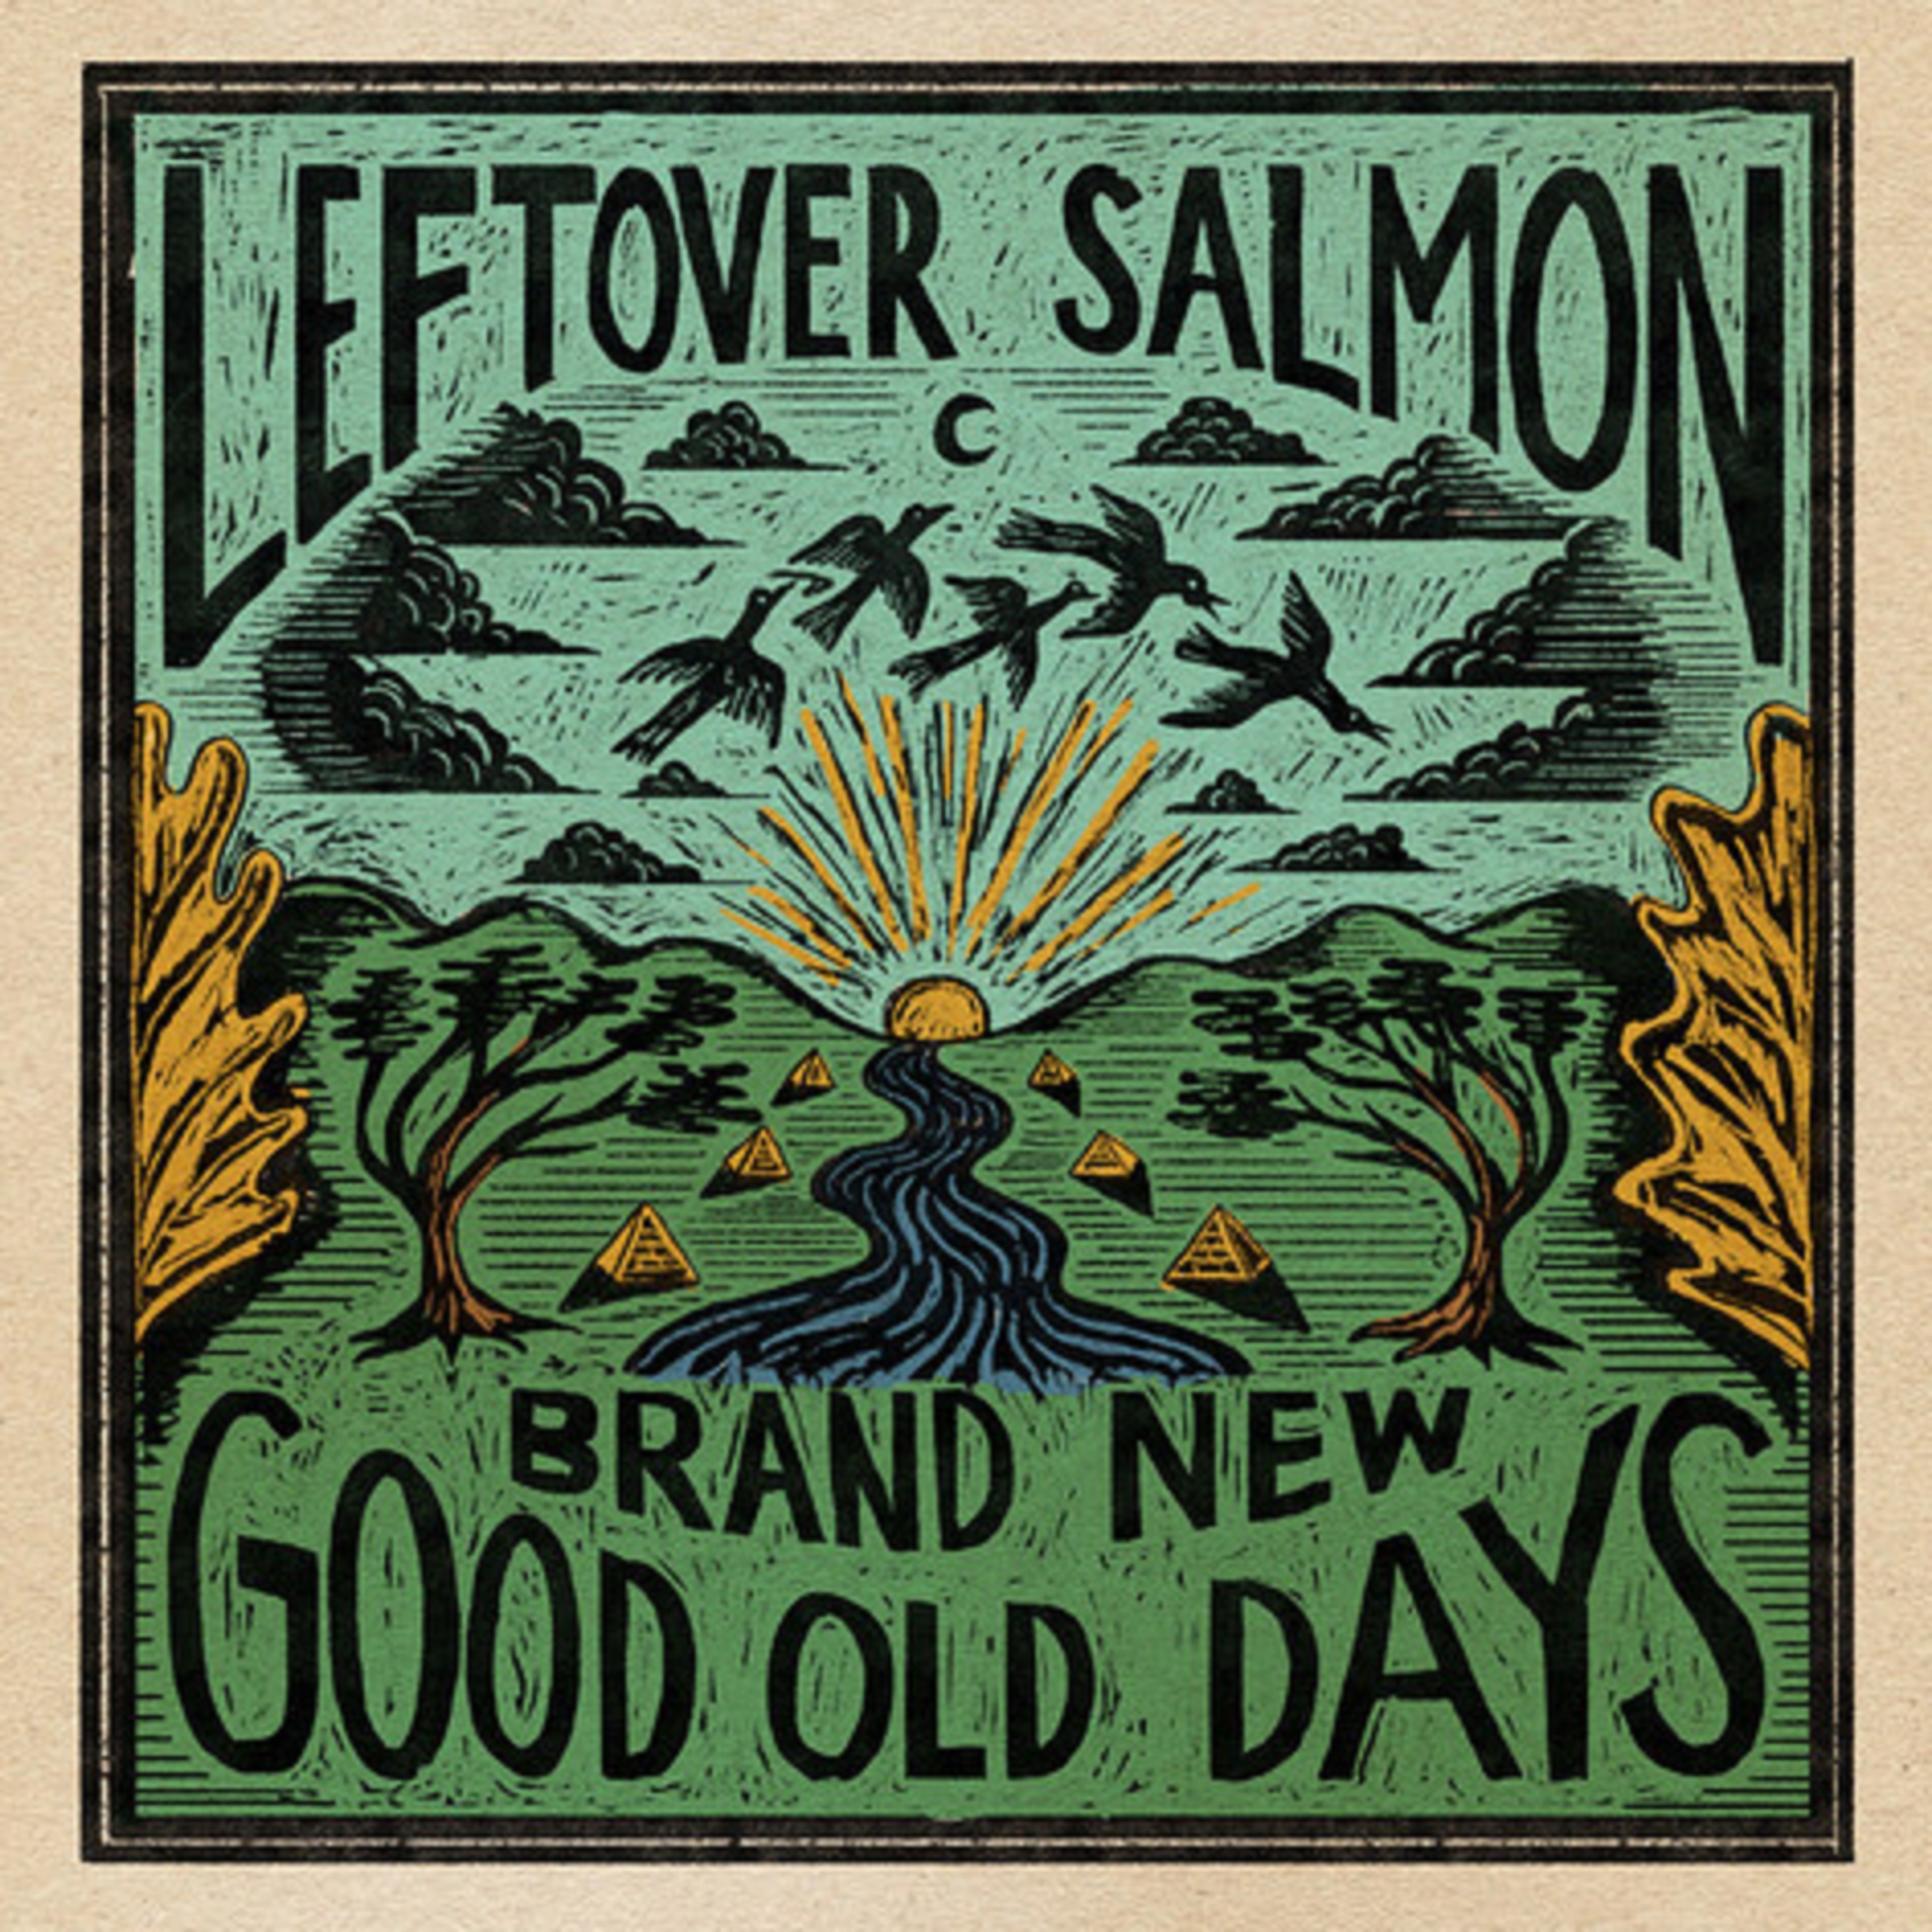 LEFTOVER SALMON releases BRAND NEW GOOD OLD DAYS